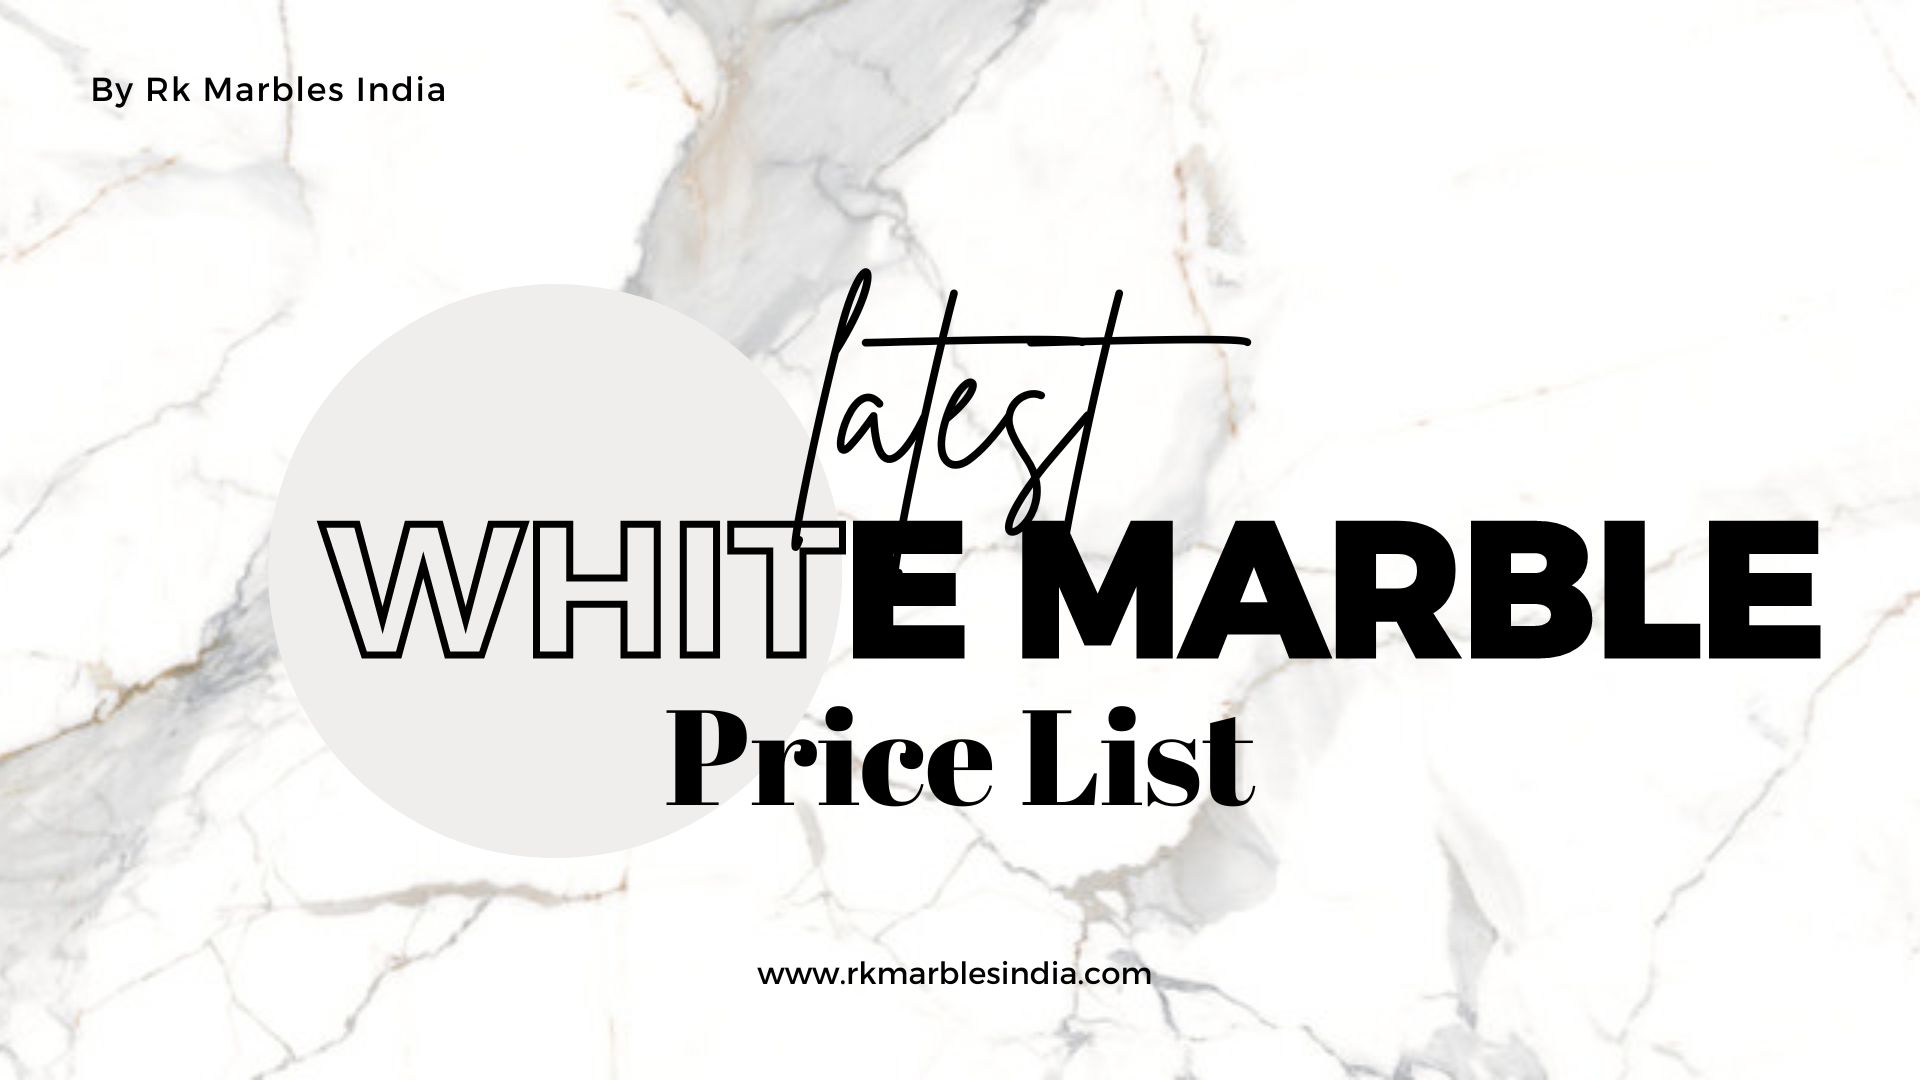 Discover the Best Deals on White Marble: Check Out Our Price List Today!